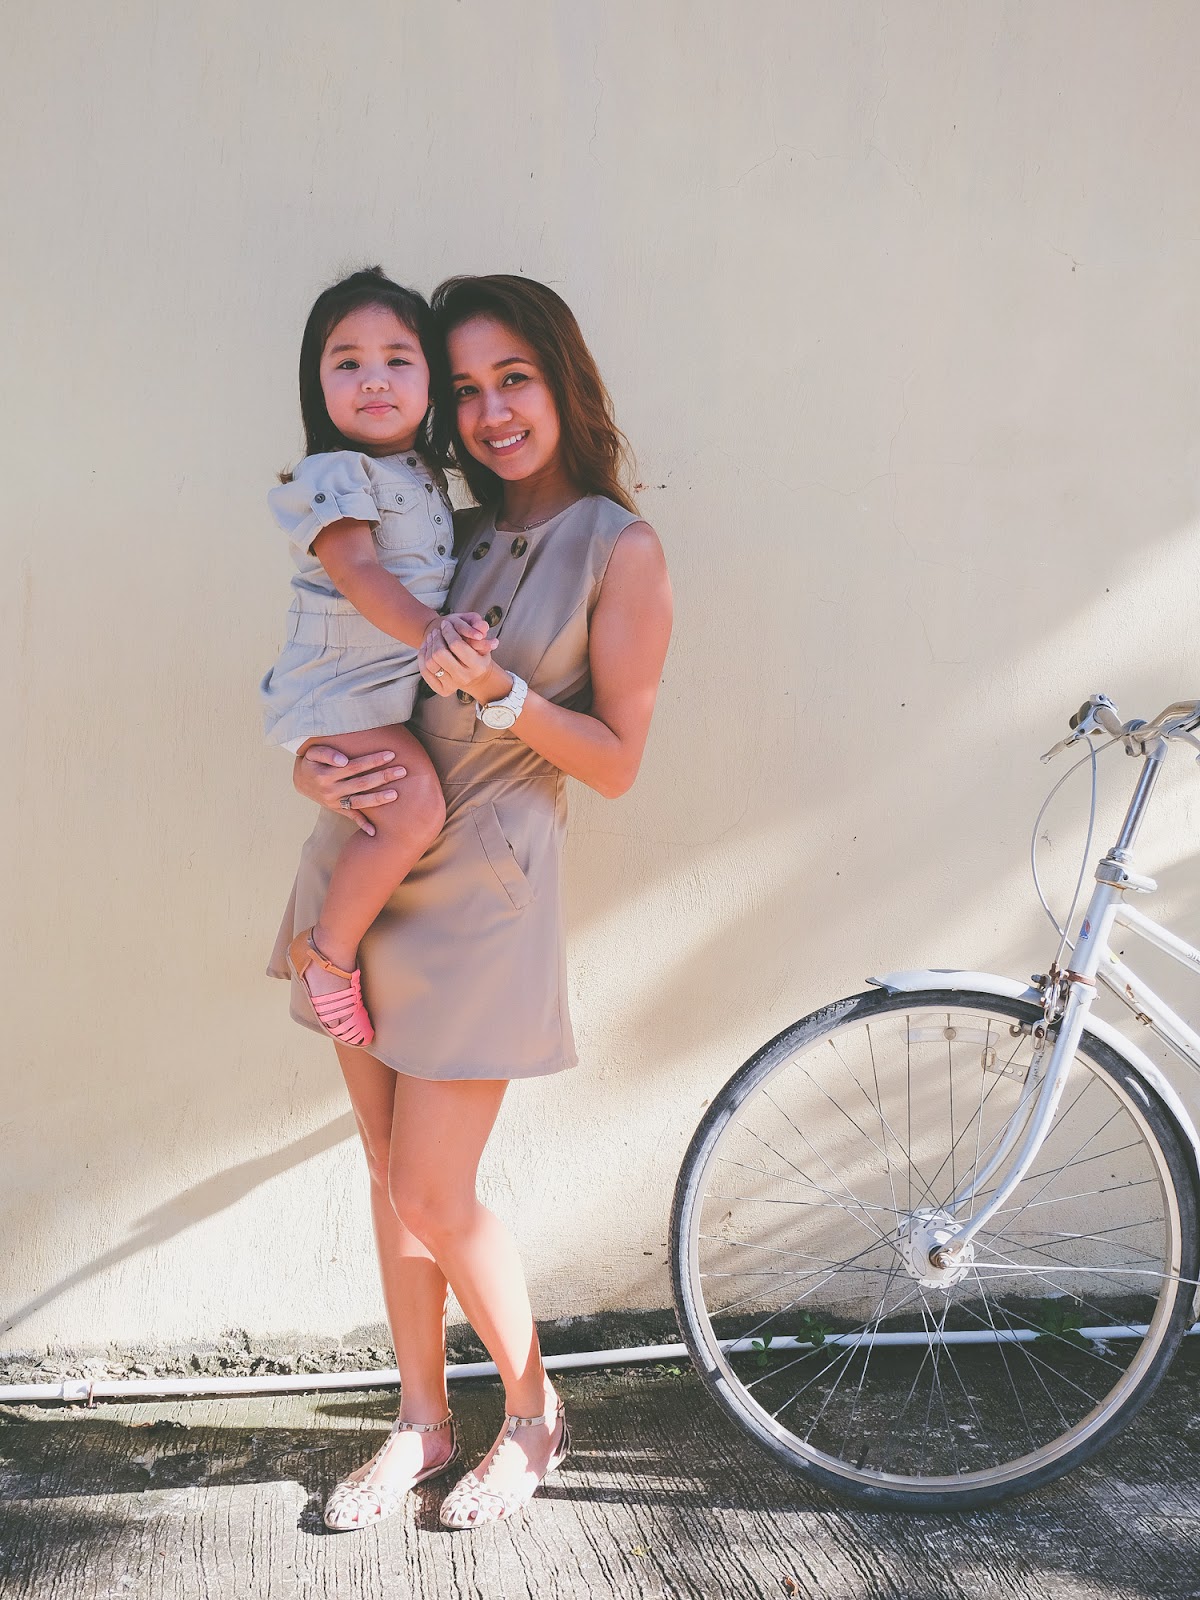 Twinning with mom, Mommy and daughter duo, matching outfits, twinning, cebu fashion bloggers, cebu bloggers, cebu mommy blogger, mommy blogs, philippine mommy blogger, mommy fashion, mommy outfits, summer outfits, cebu lifestyle blogger